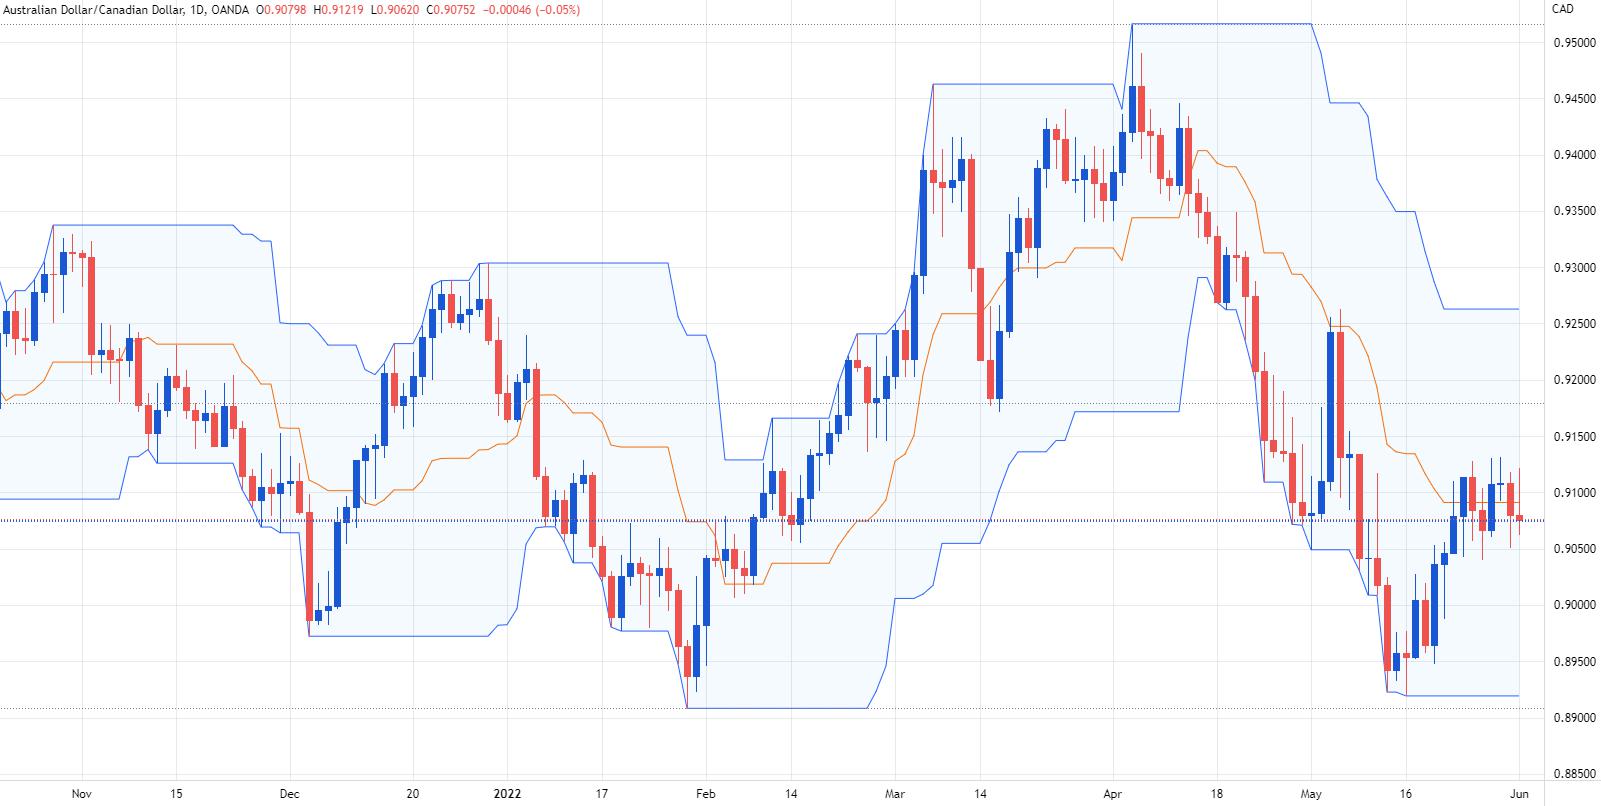 AUD/CAD: Battle of the commodity currencies